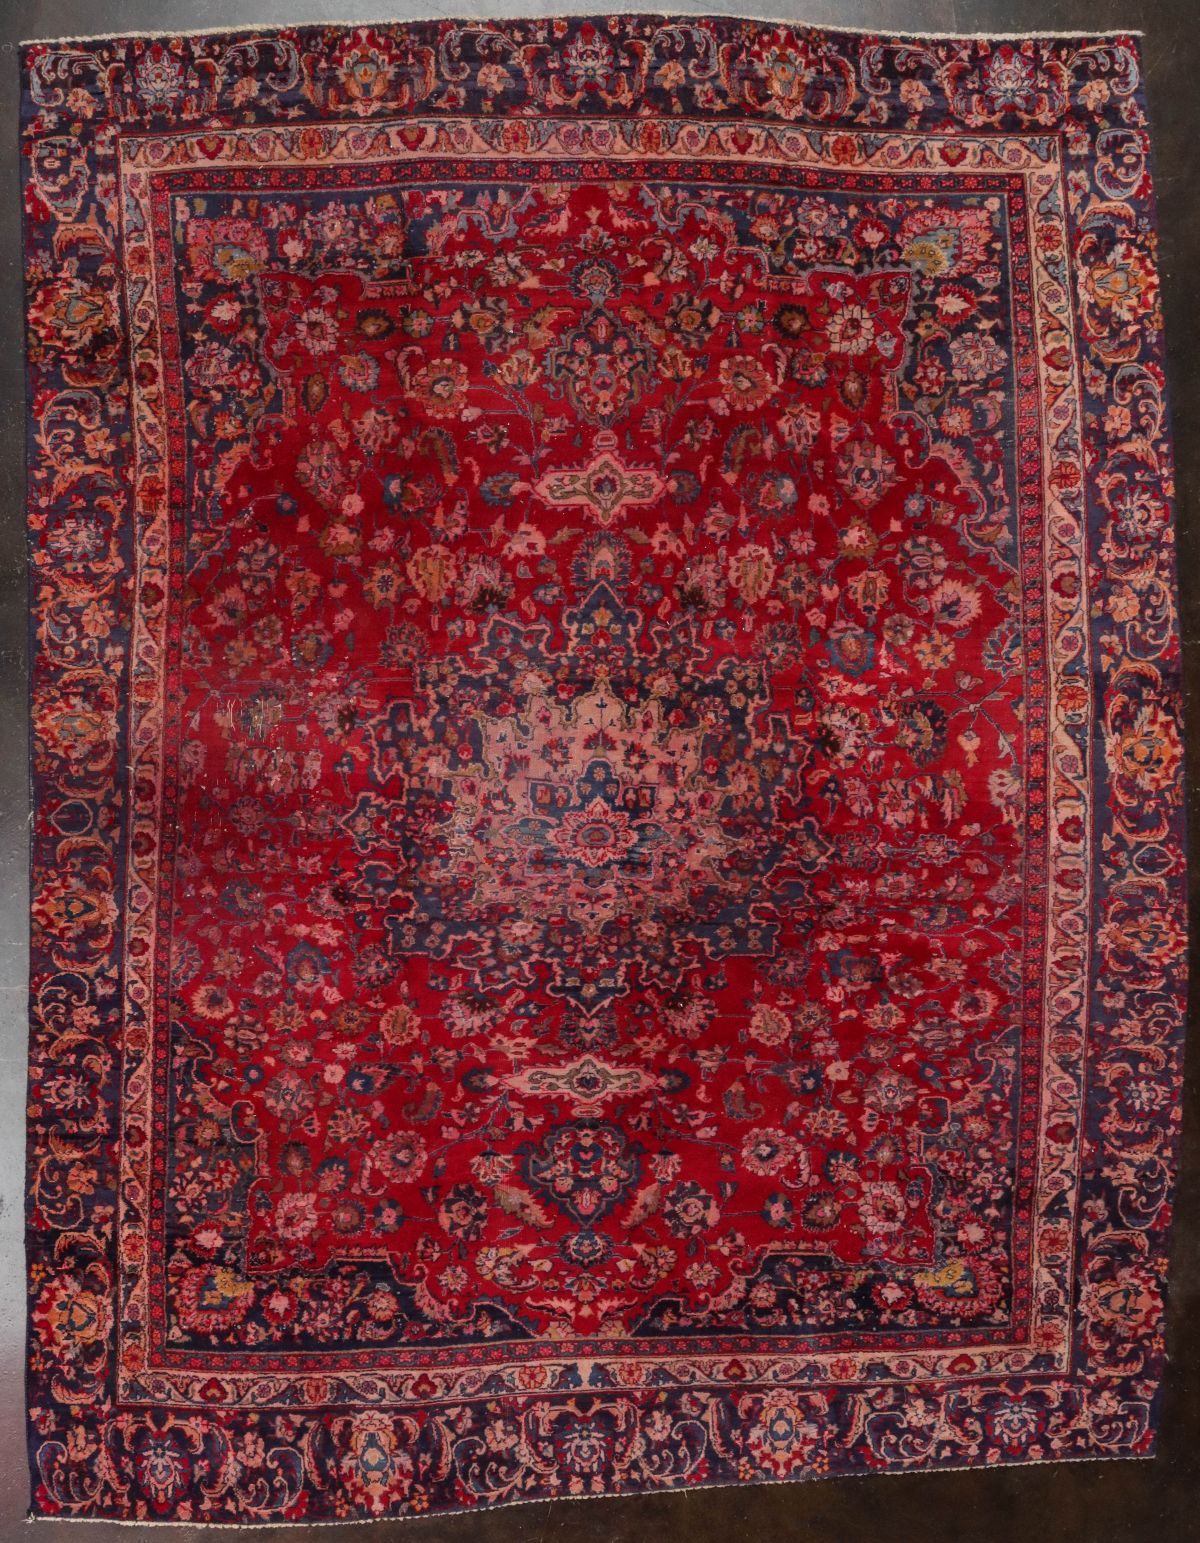 A MID TO LATE 20TH CENTURY HAND MADE PERSIAN RUG